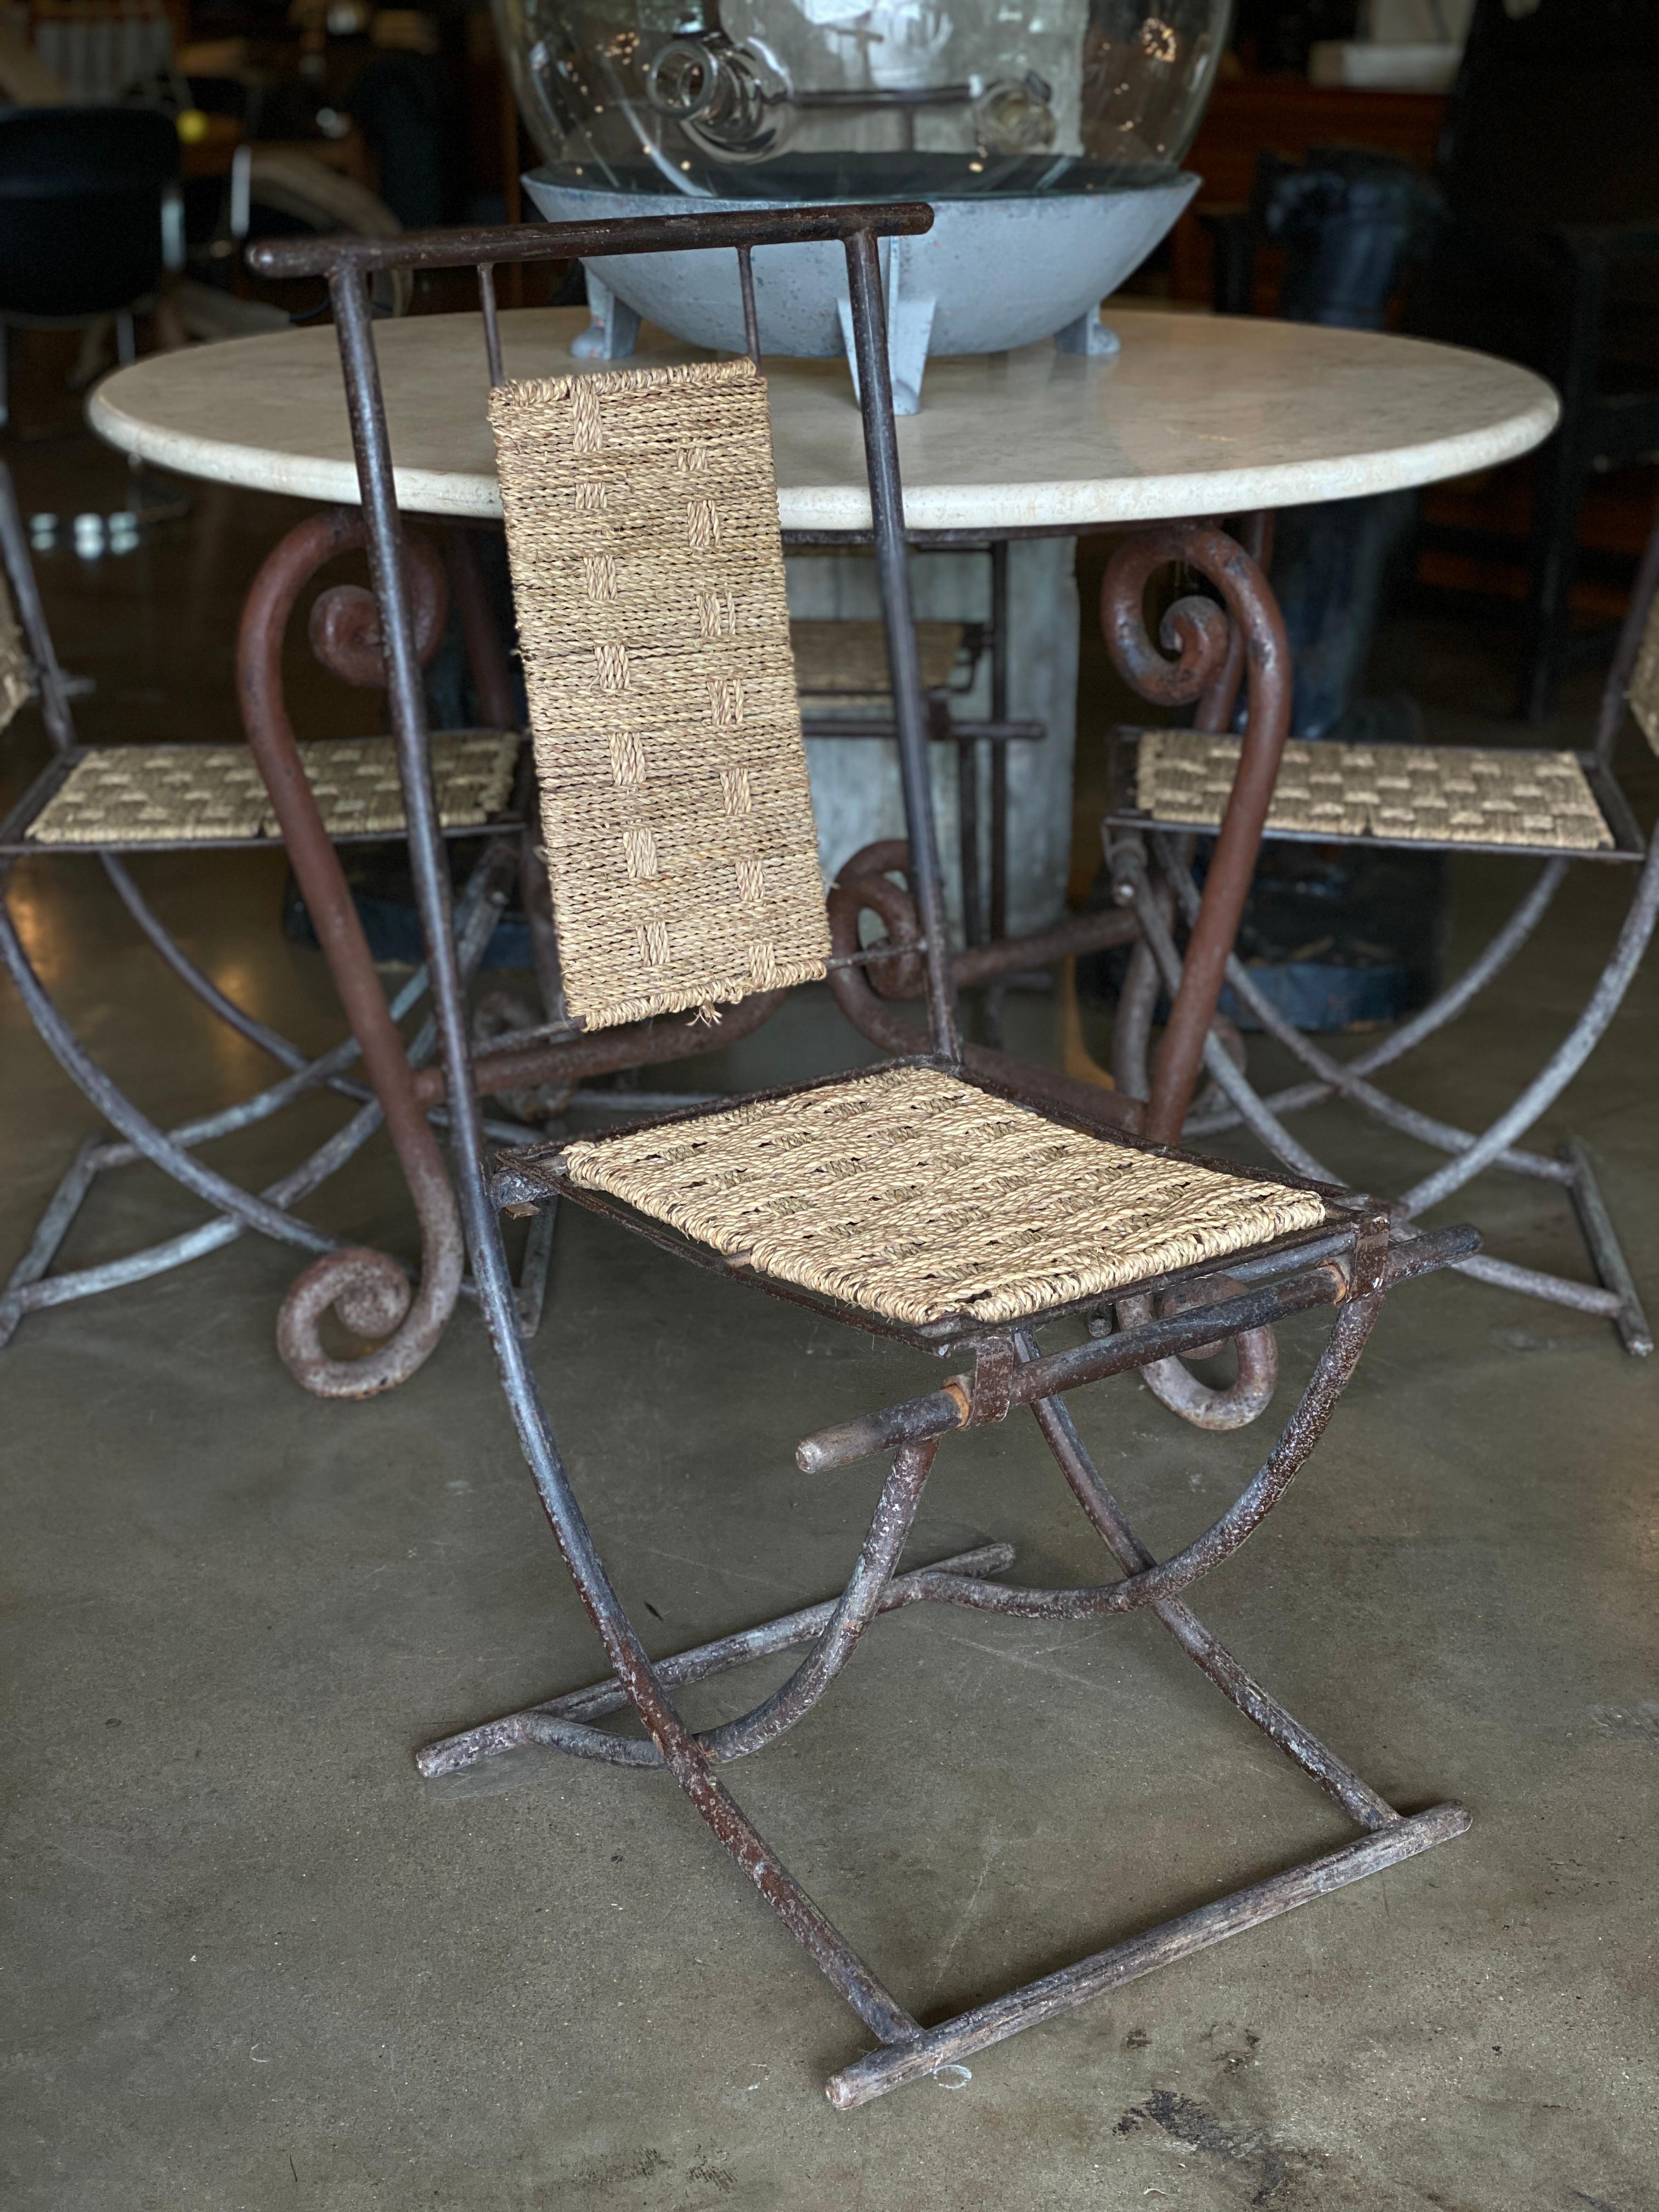 Iron framed dining chairs with basket weave style seats and backs. Sturdy and comfortable. Folding chairs can compress and Stand for storage. Set of 4. France, 1930s-1950s.

See table listing: LU1140215015672.